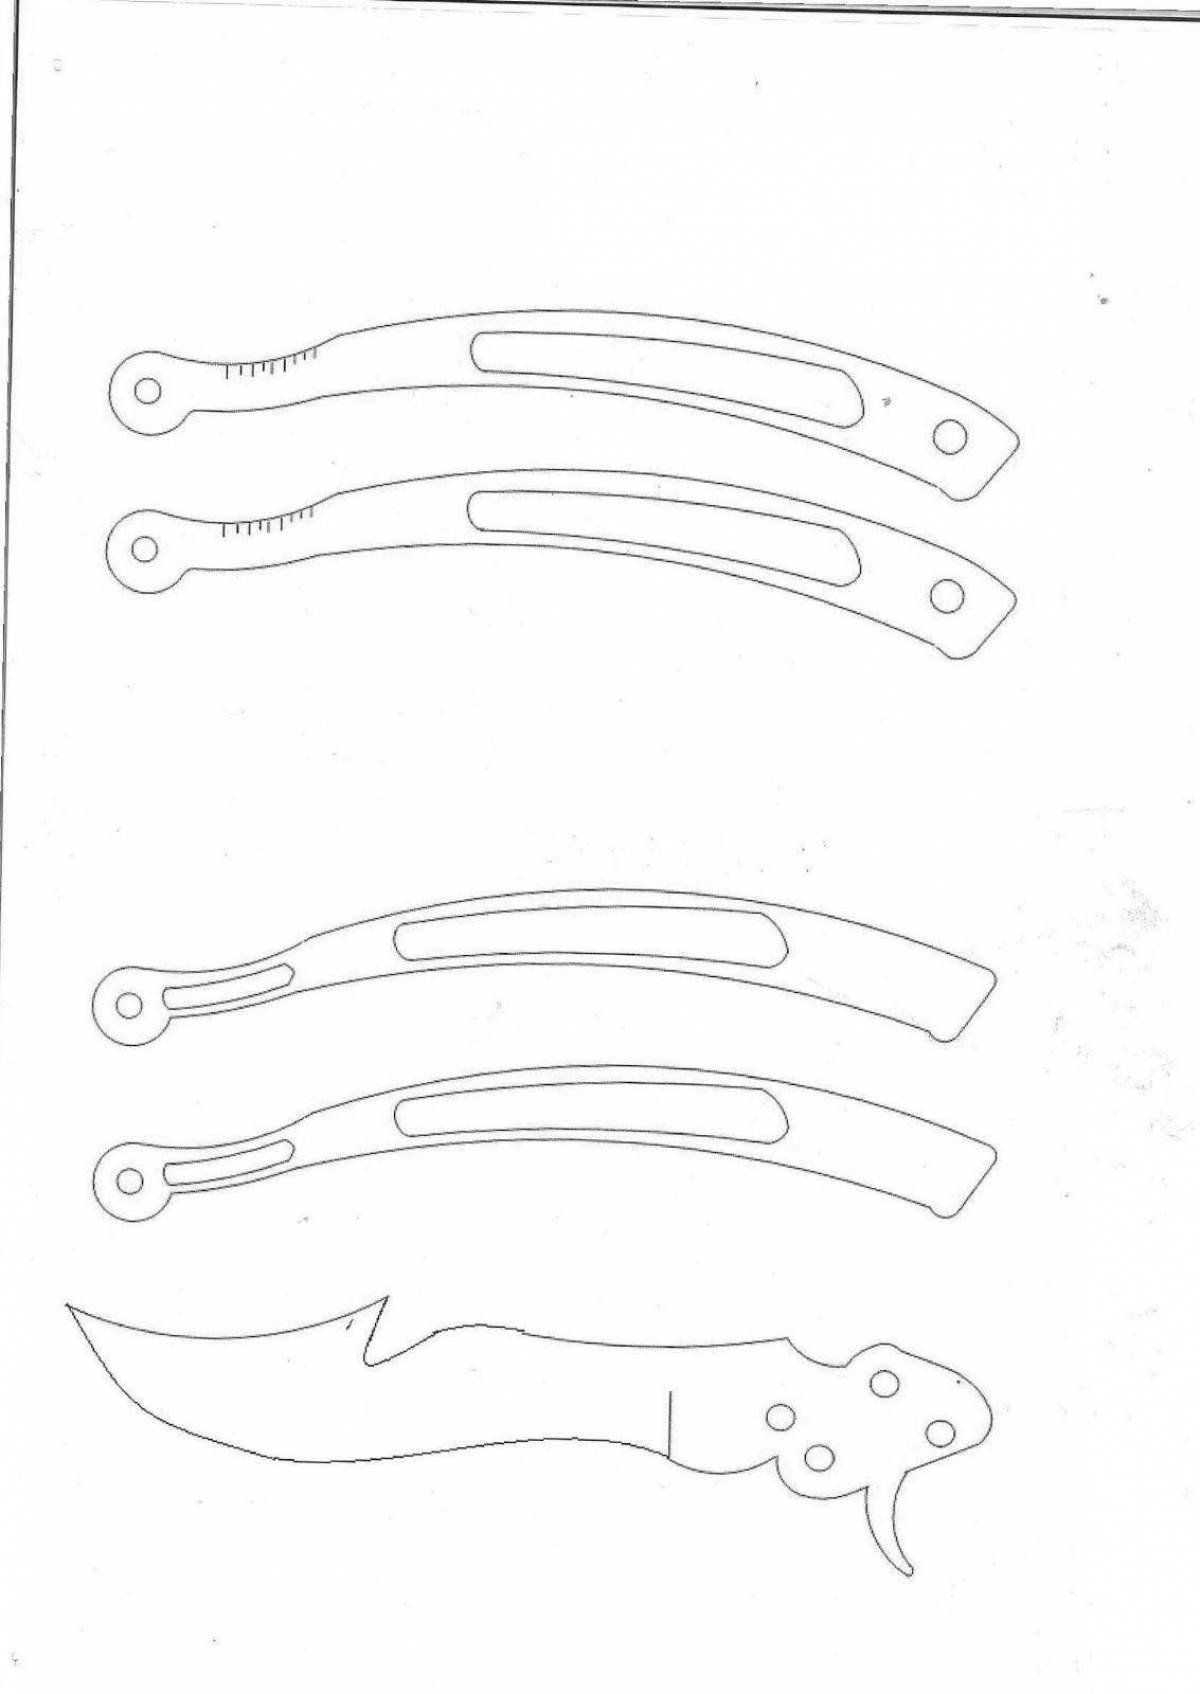 Great butterfly knife coloring book